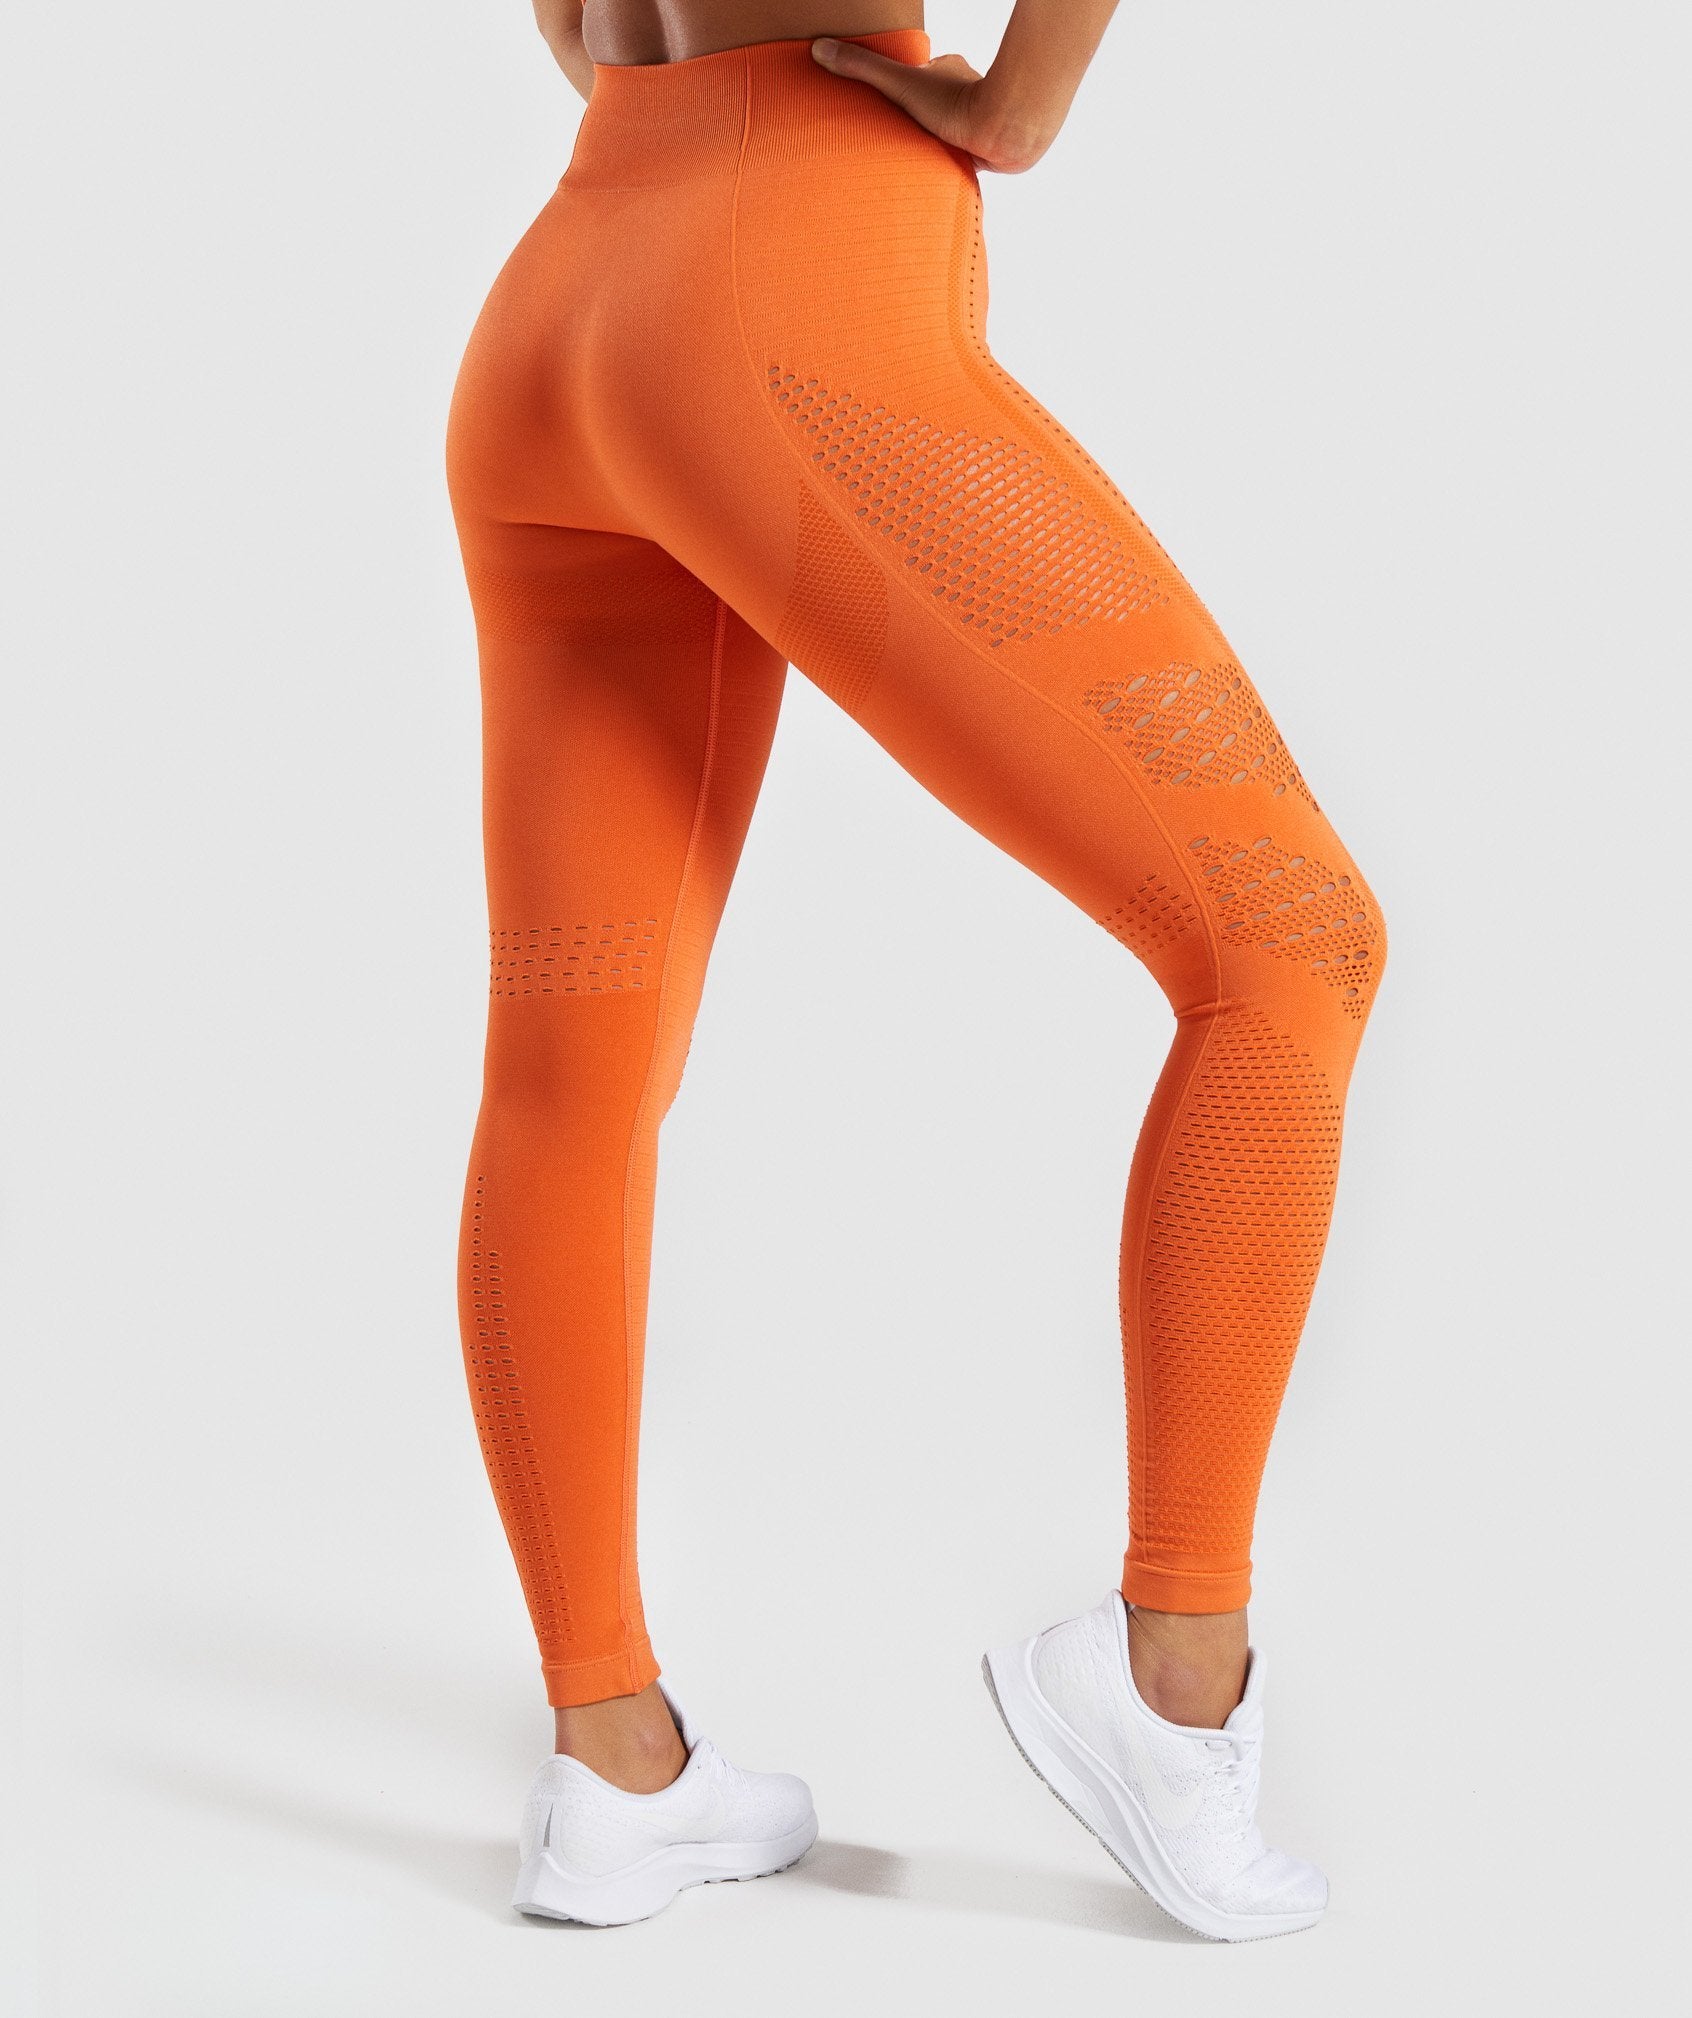 Flawless Knit Tights in Burnt Orange - view 2